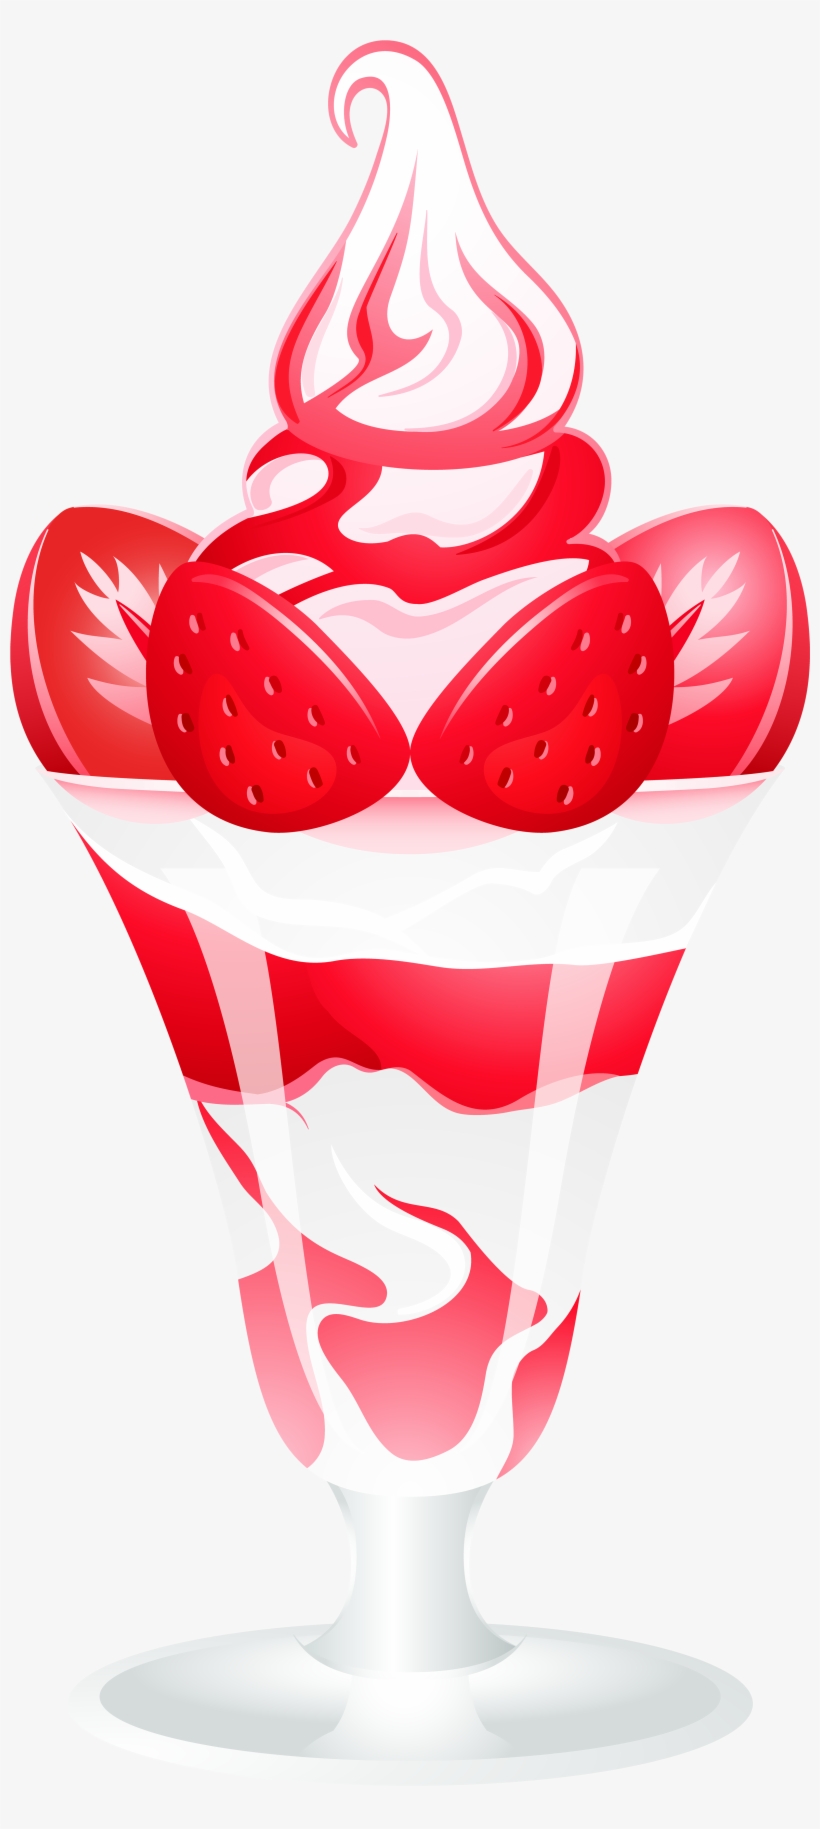 Sundae Clipart Banner - Strawberry Ice Cream Clipart, transparent png #441703